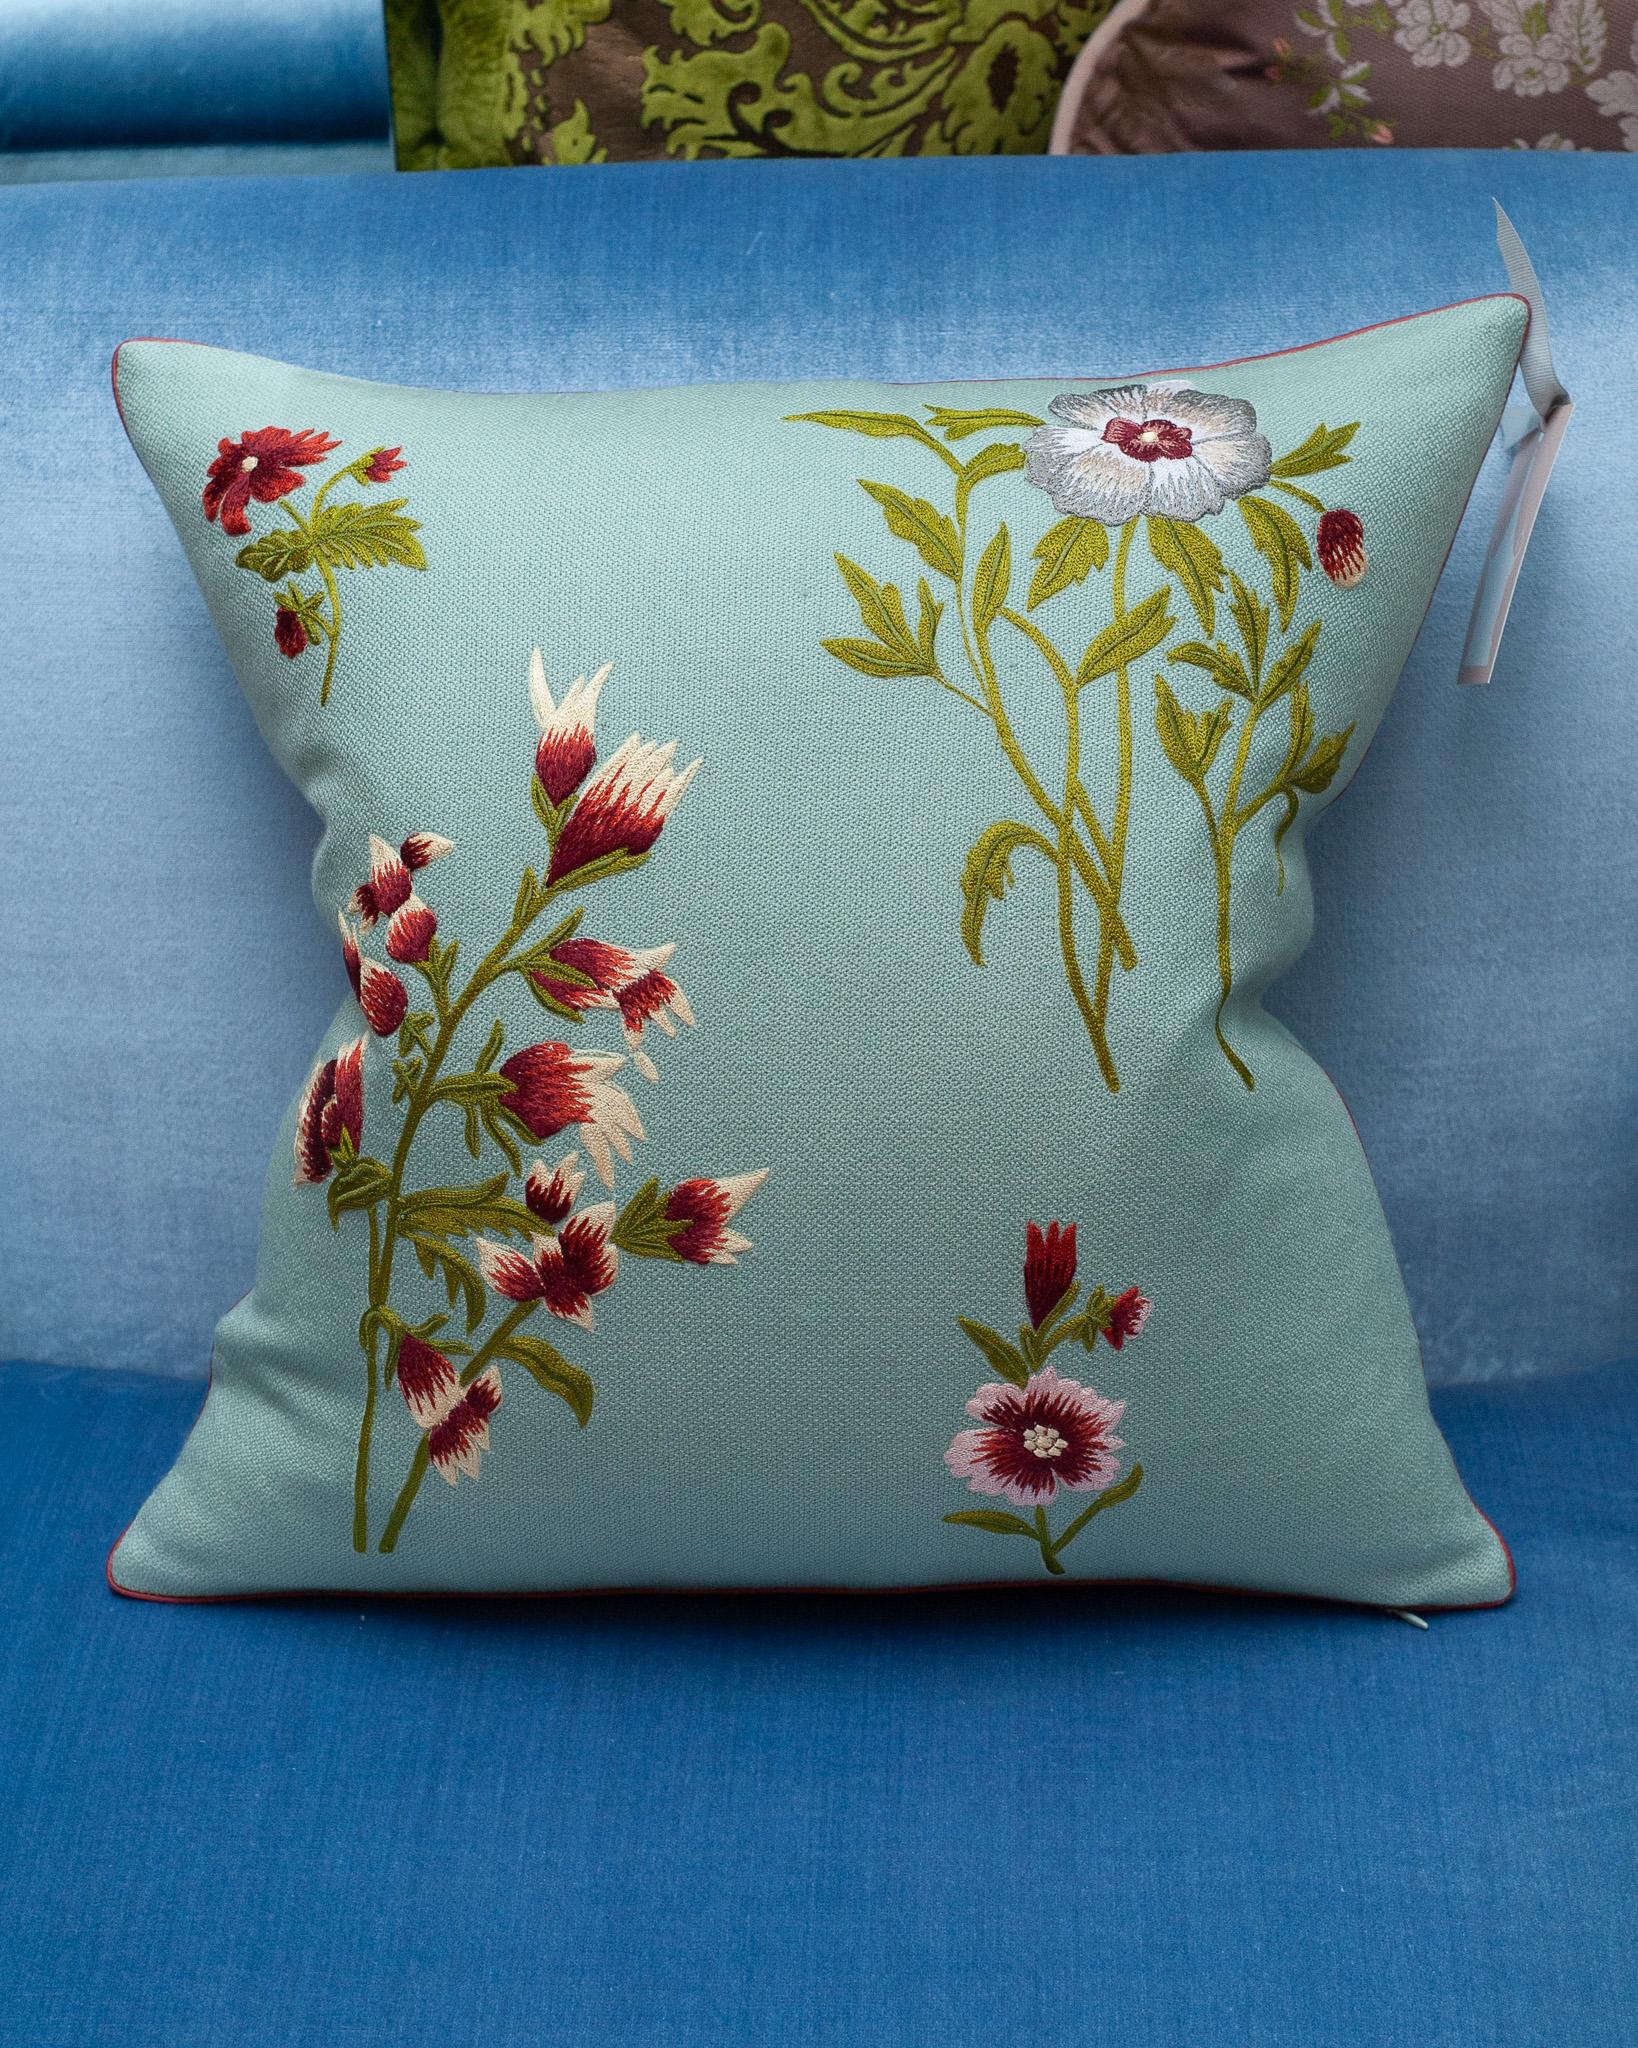 A stunning contemporary soft blue merino wool and linen pillow, trimmed with red piping and embroidered in wool with multiple floral motifs. Filled with the highest quality Canadian down and feather for a pillow that feels as luxurious as it is